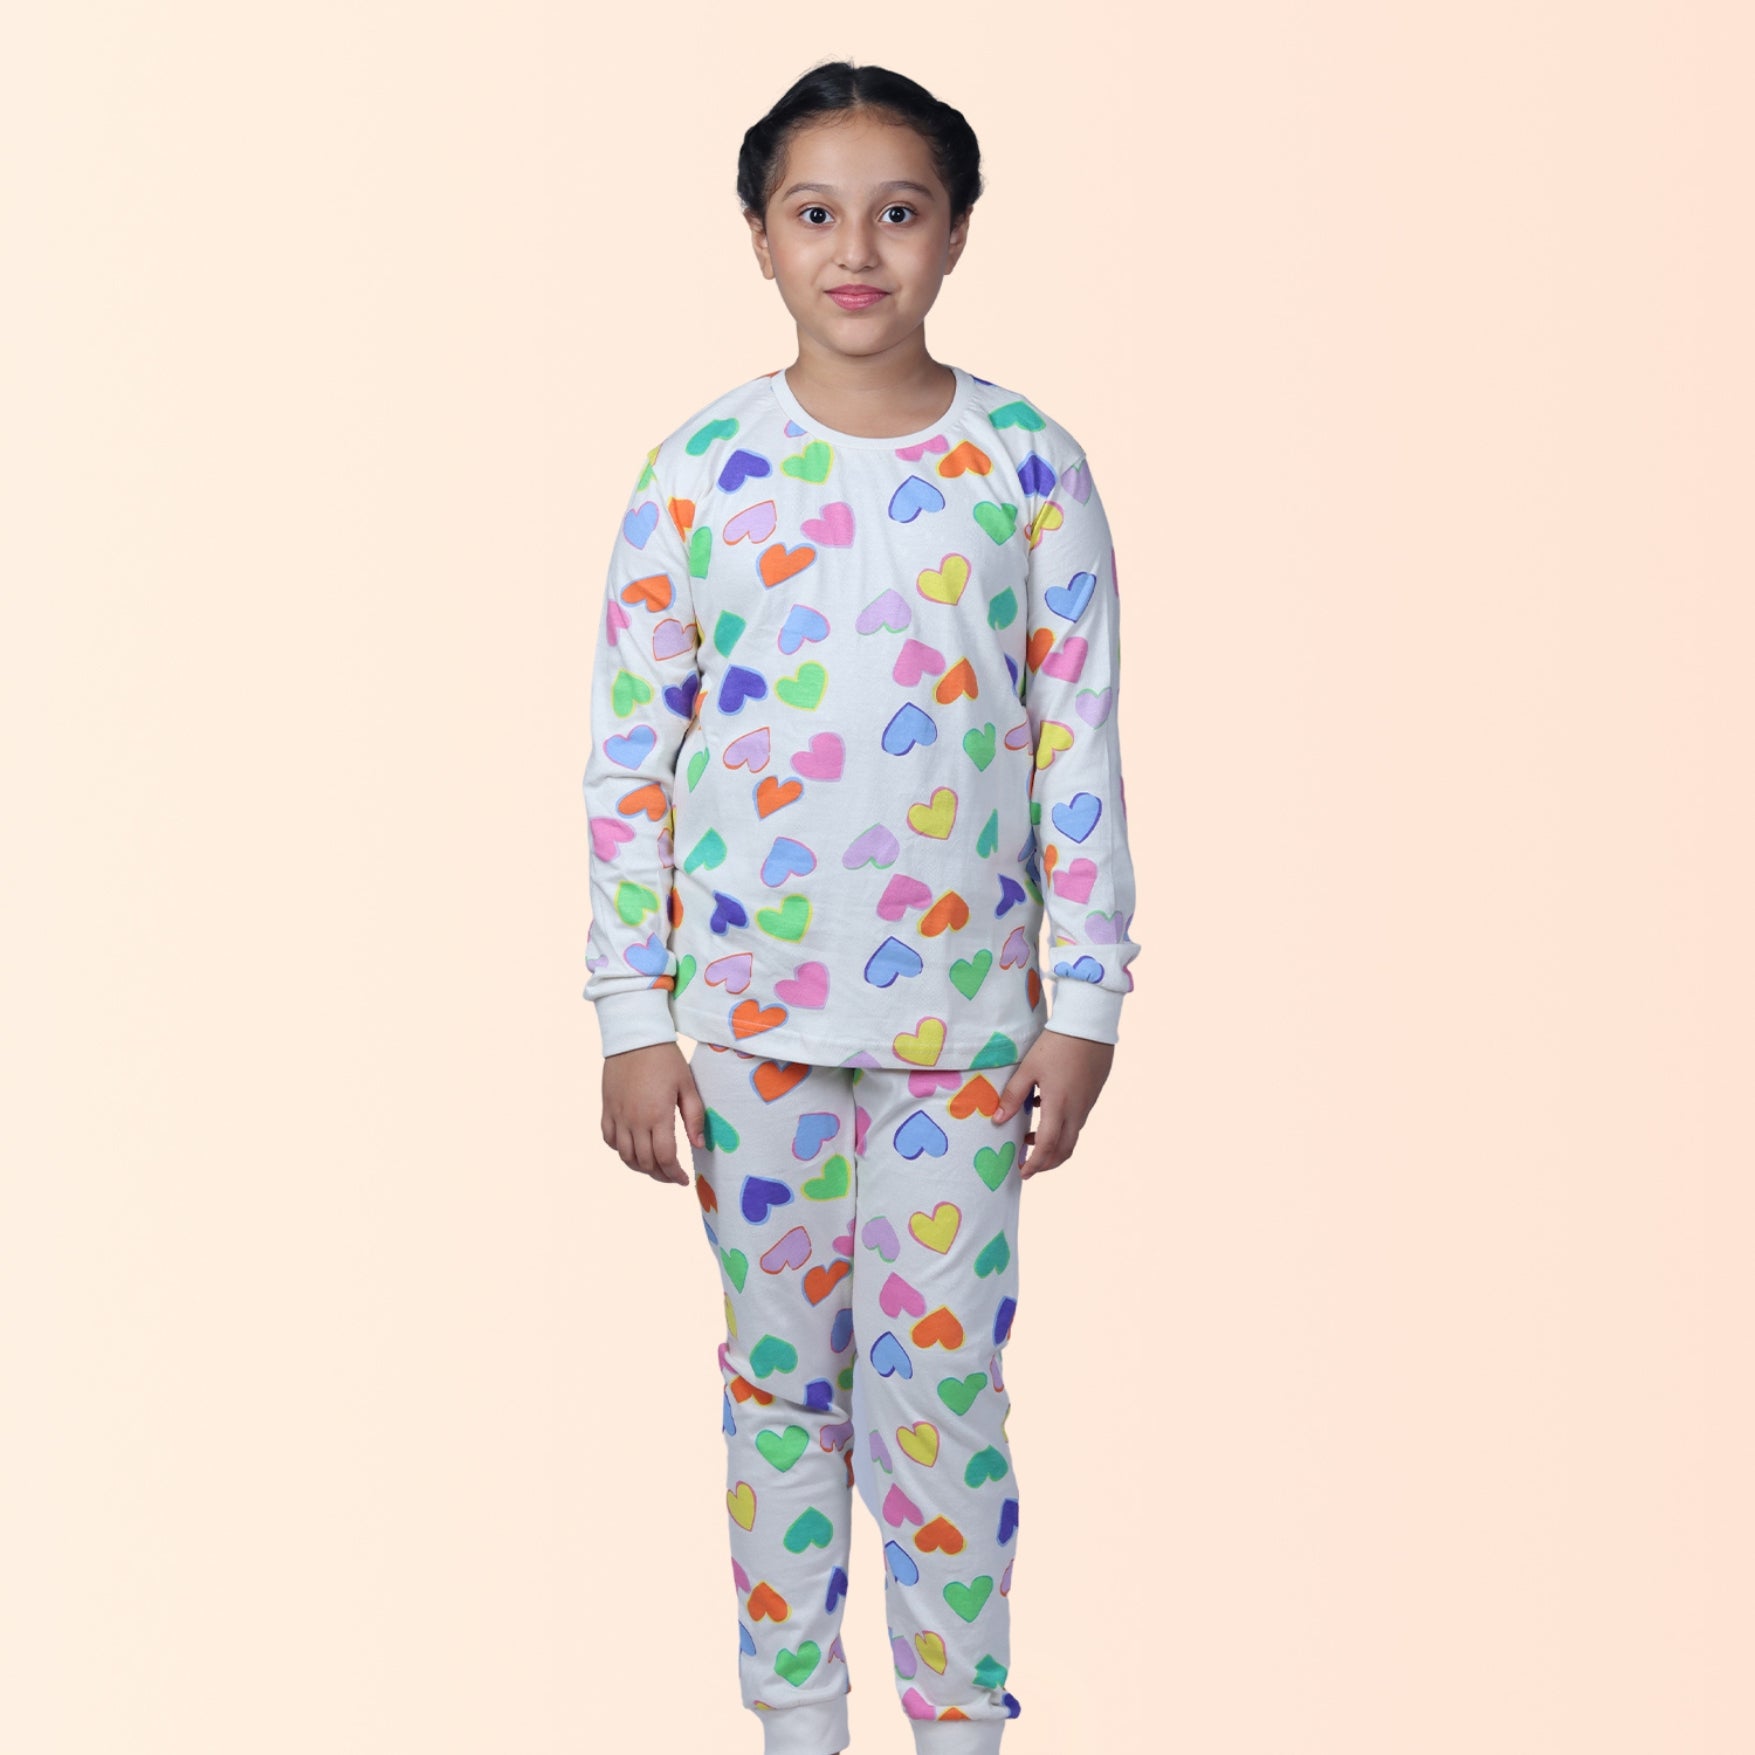 Full Sleeve Night Suit For Girl In White Colour - Multicolour Hearts